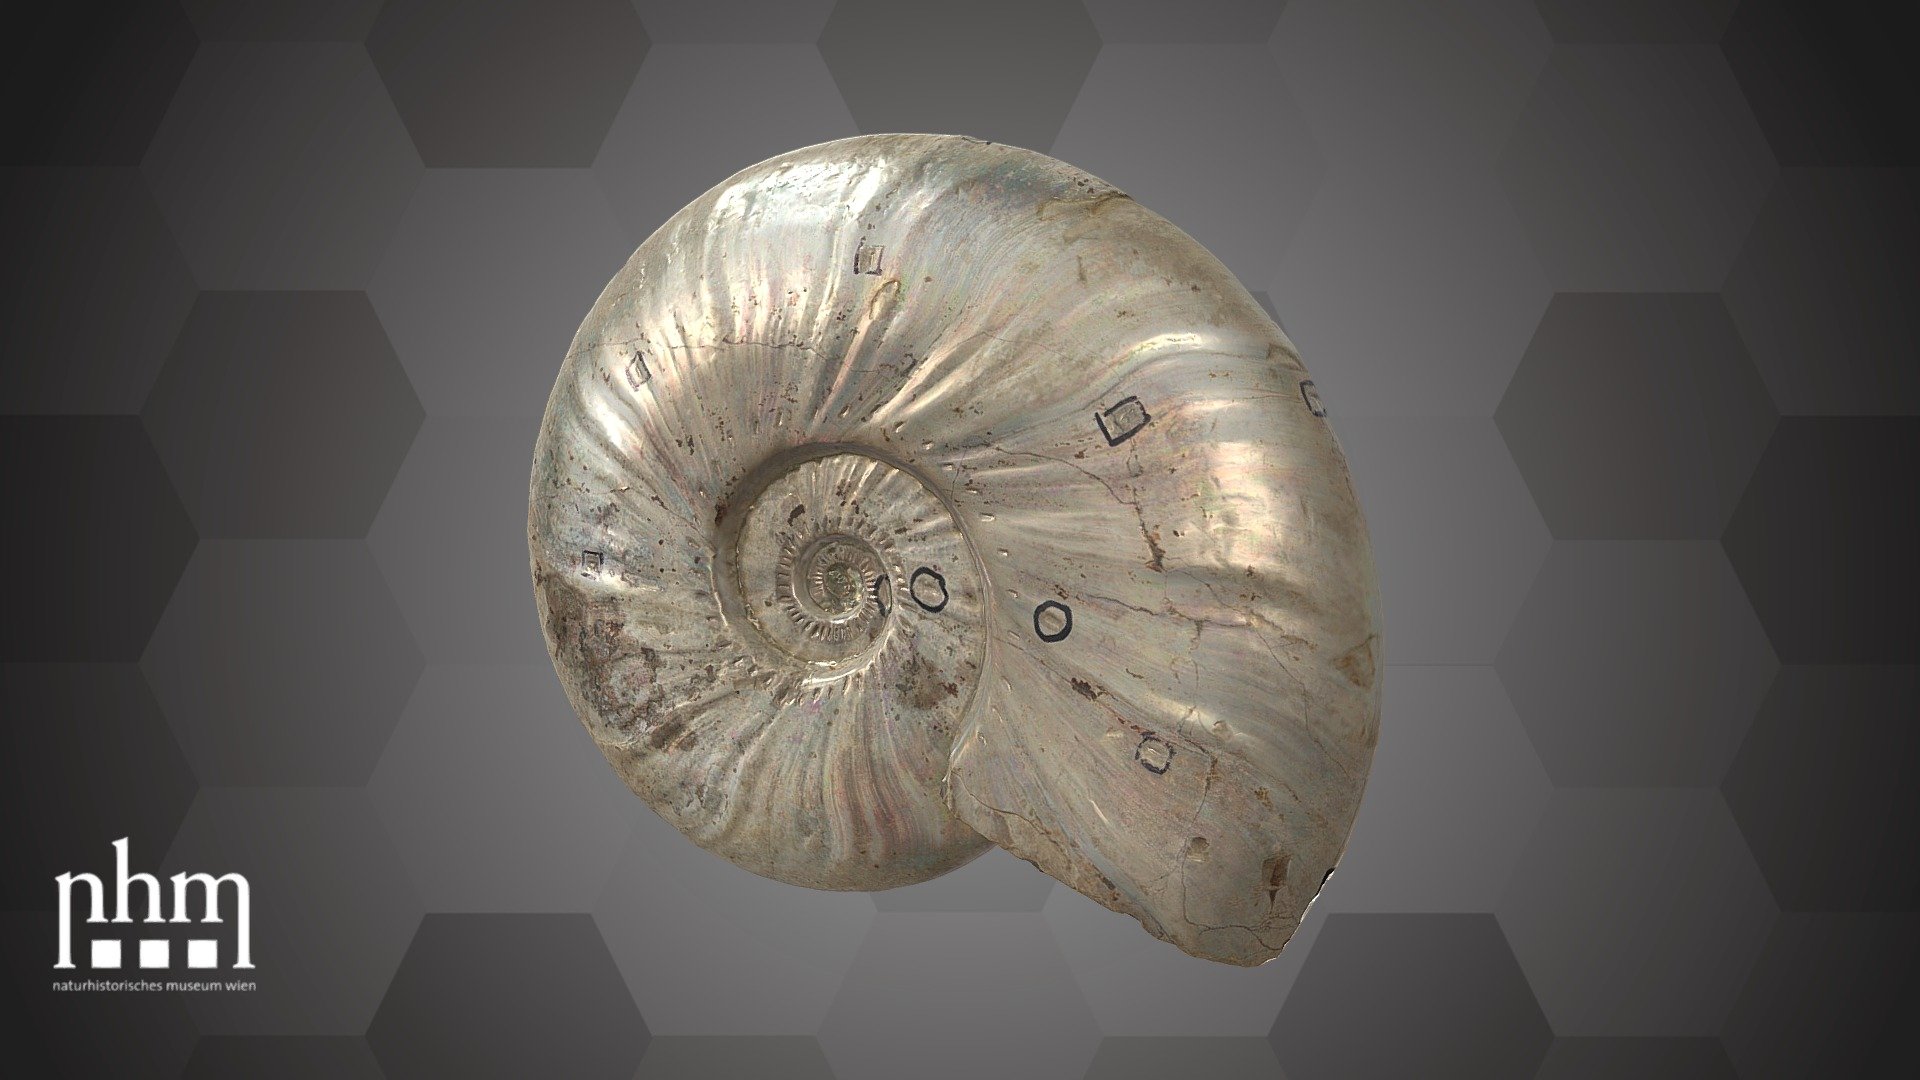 3D scan of a fossilized ammonite from the Lower Albian (Lower Cretaceous). The mother-of-pearl shell is still visible, which makes this piece special. This ammonite was found in Ambatolafia within the Mahajanga Basin in the northwest of Madagascar. Take a look at a 3D scan of a big block full of fossilized ammonites from the same location here. 

This fossil cannot be found in the exhibition of the NHM Vienna. Some other beautiful specimens of this kind can be found in Hall 8 of the NHM Vienna. 

Specimen: Aioloceras besairiei (Collingion, 1949)

Inventory number: NHMW-Geo 2021/0021/0001

Collection: Natural History Museum Vienna, Geology &amp; Palaeontology Dept., Mesozoic Coll. (curator: Alexander Lukeneder)

Find out more about the NHMW here.

Scanned and edited by Nikola Brodtmann (NHMW)

Scanner: Artec Space Spider. Infrastructure funded by the FFG 3d model